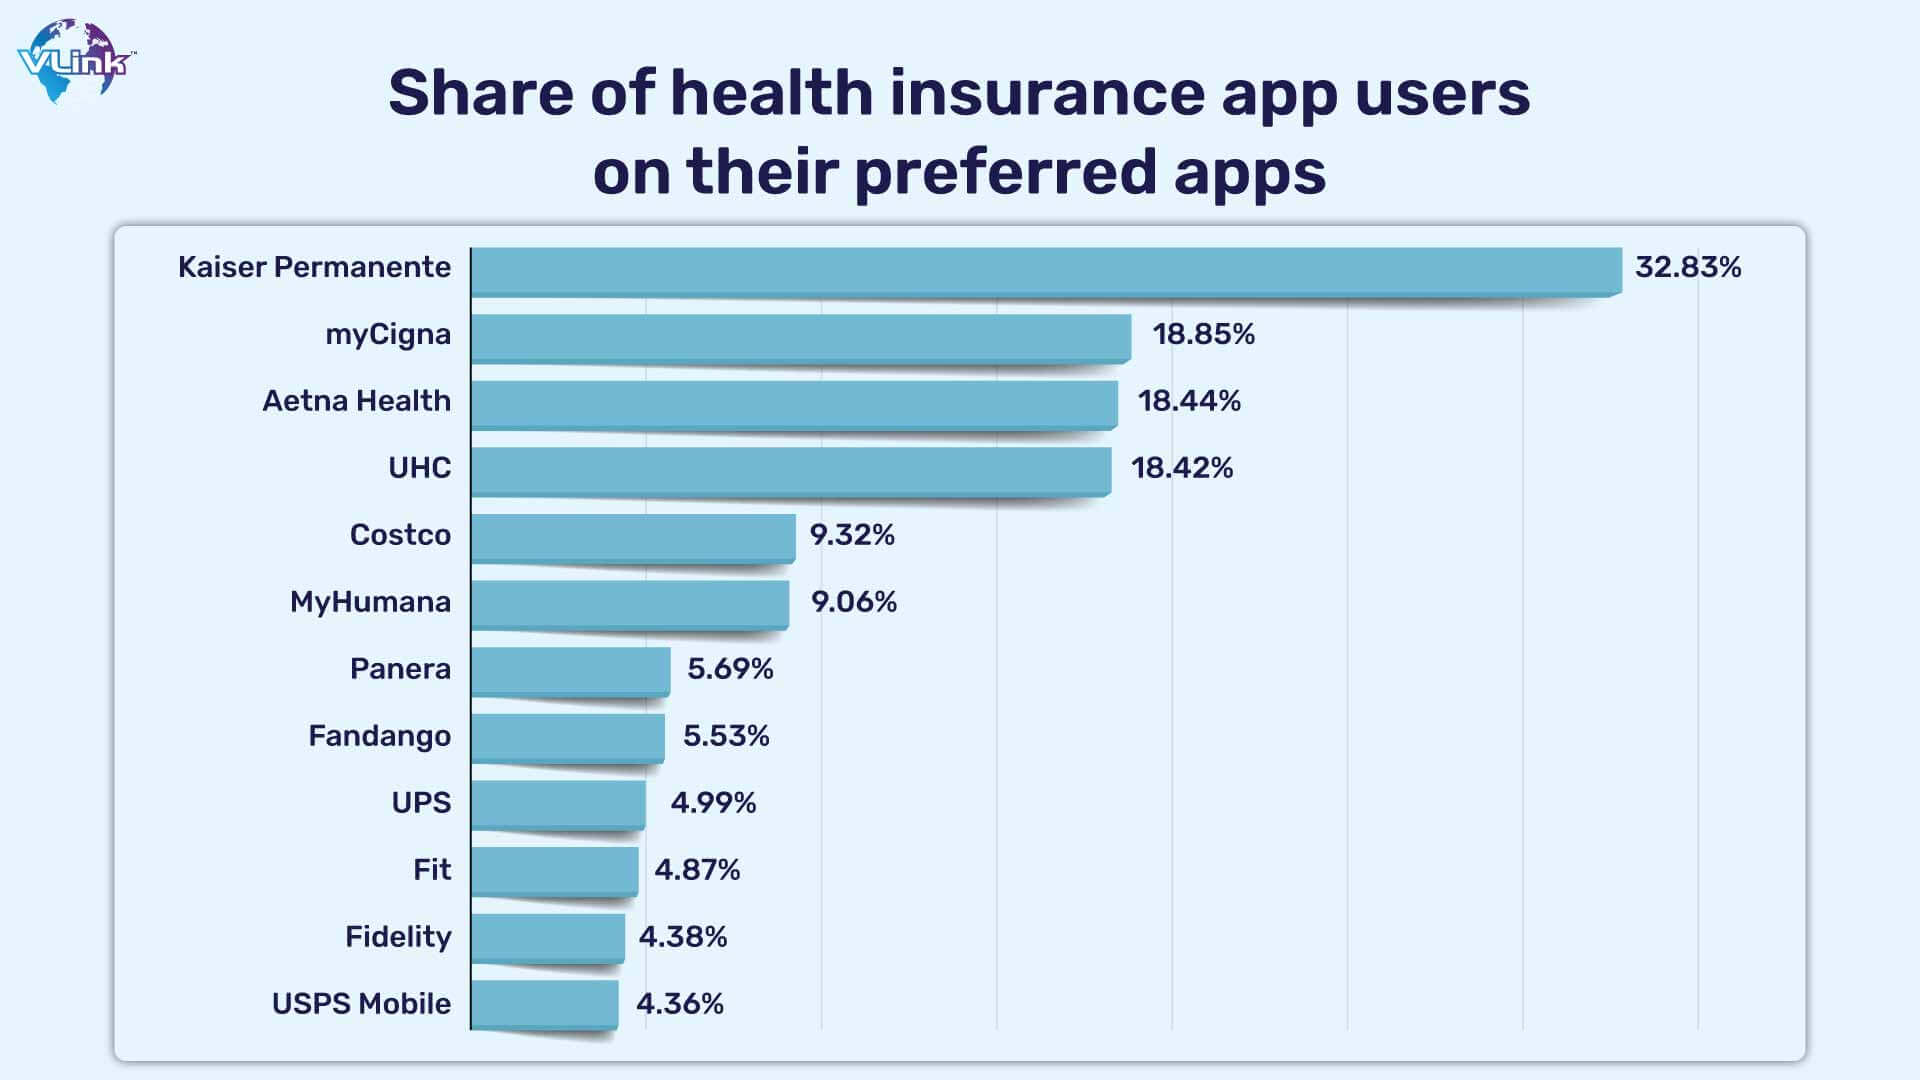 Share of health insurance app users on their preferred apps